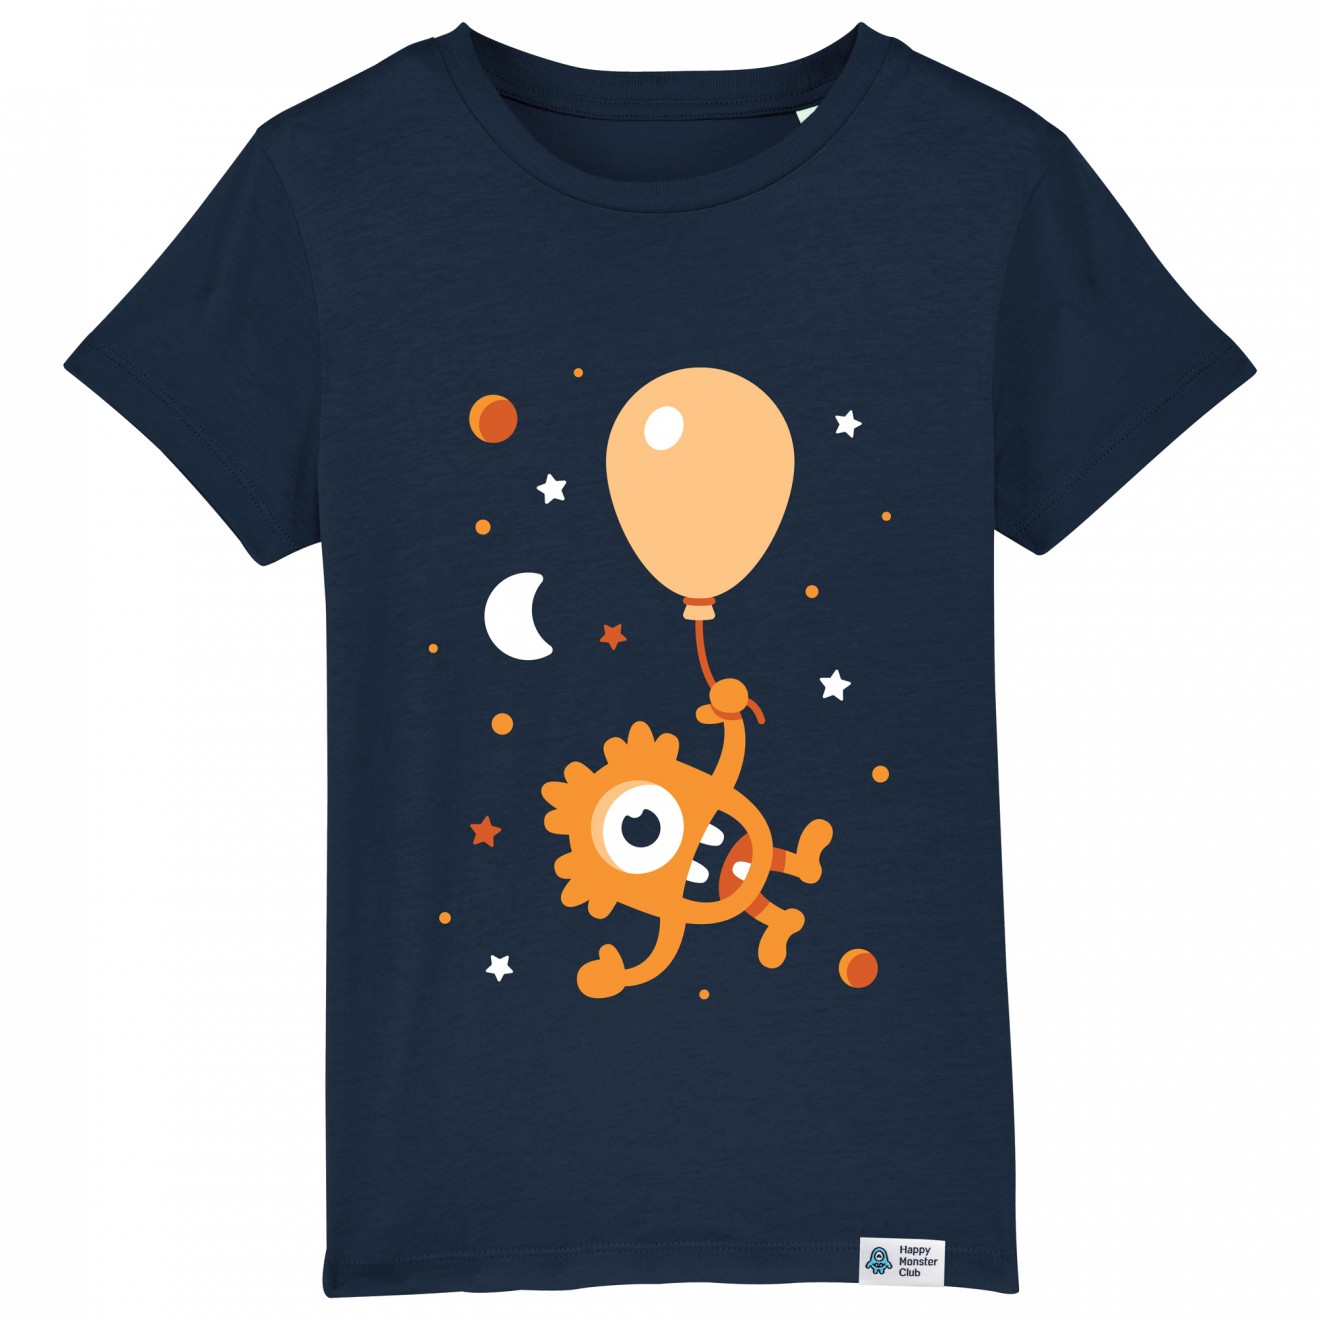 Image of the product Cosmos, from the product category T-shirts